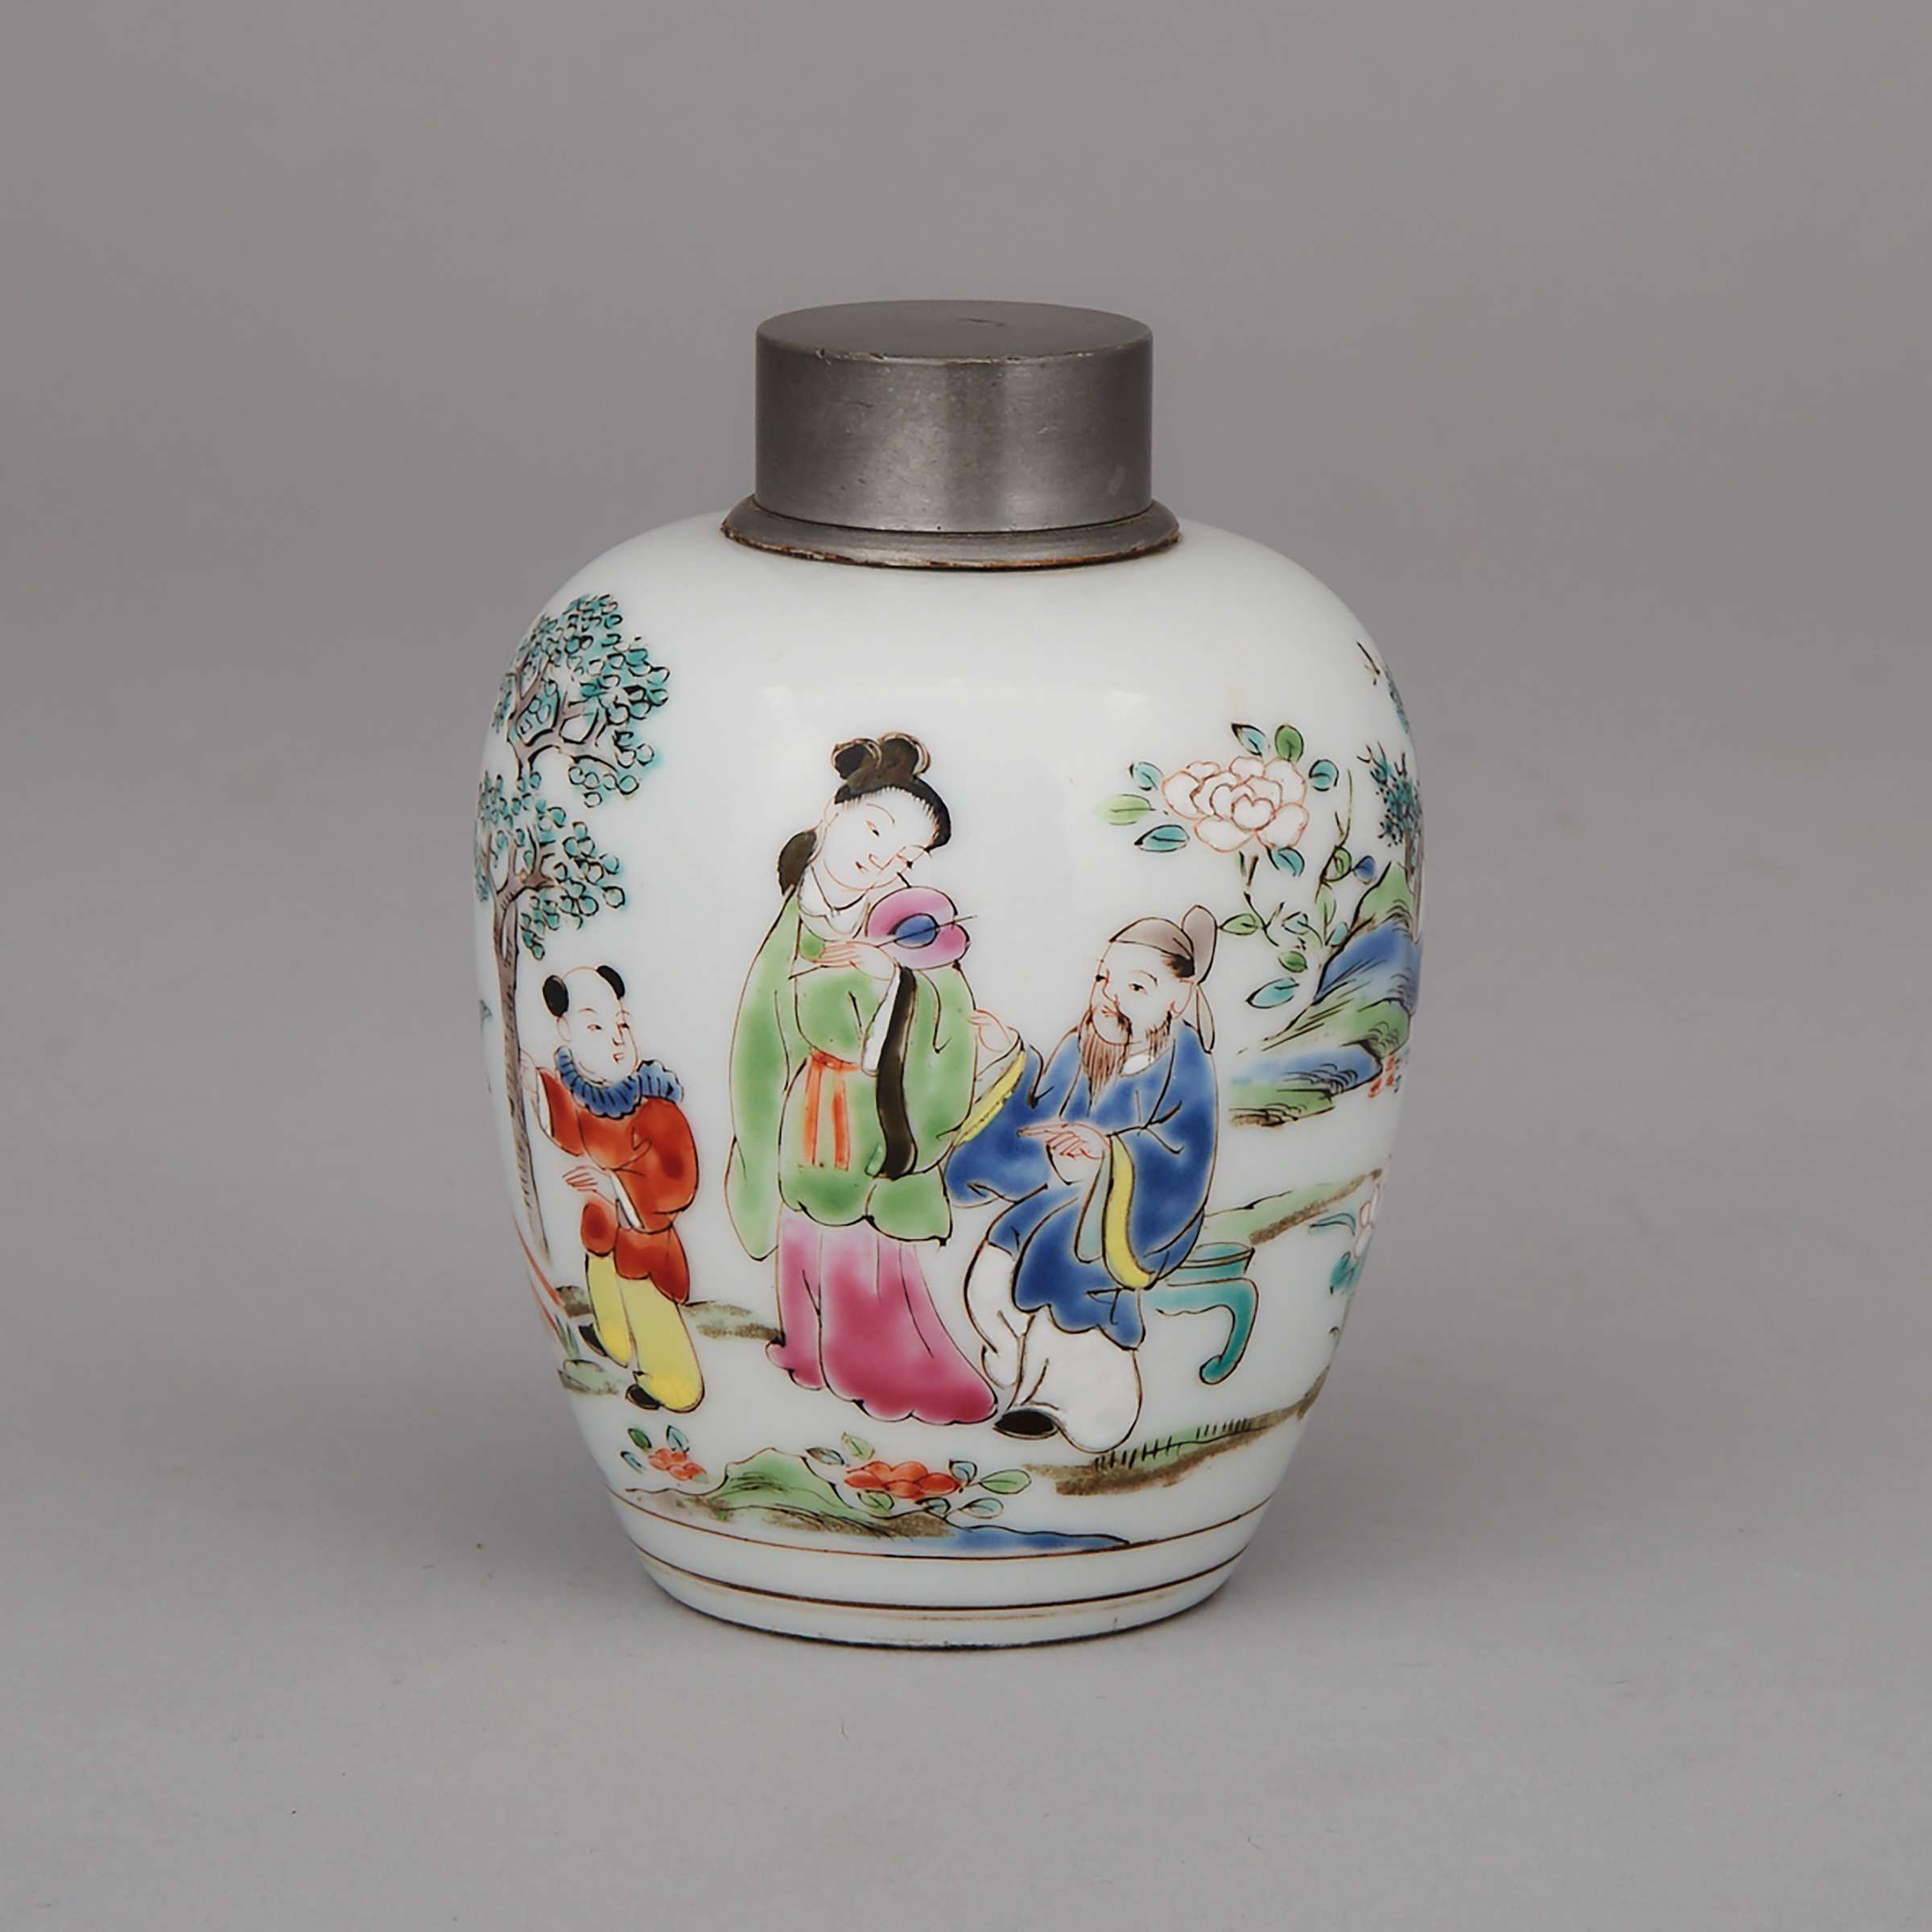 Chinese Export Porcelain Tea Canister, late 19th/early 20th century